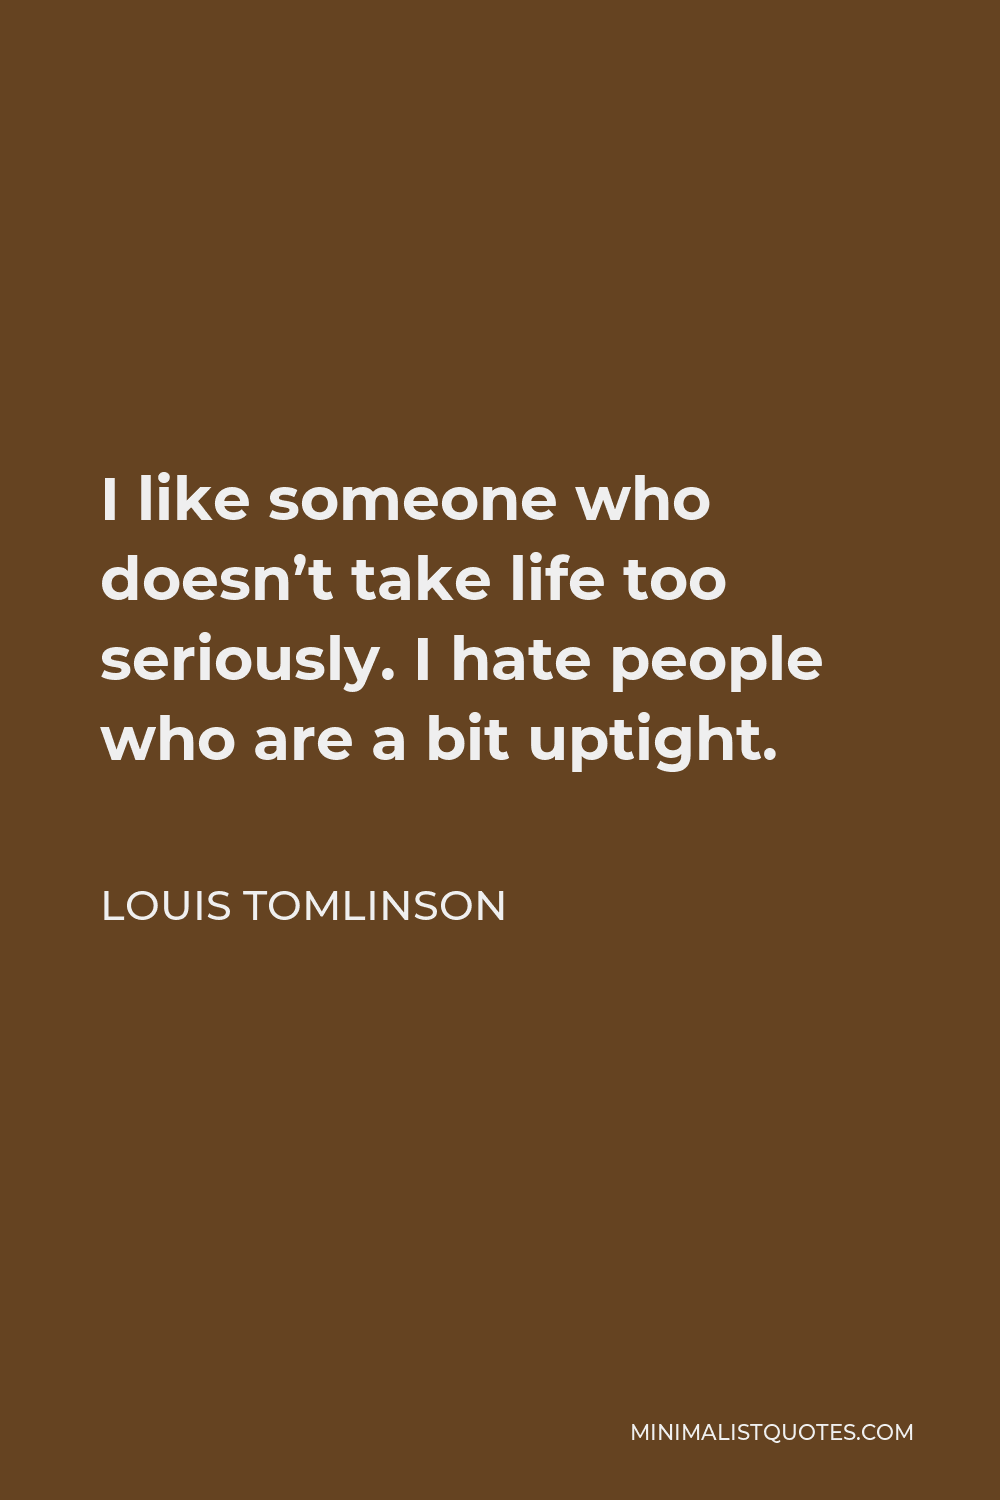 Louis Tomlinson Quote - I like someone who doesn’t take life too seriously. I hate people who are a bit uptight.